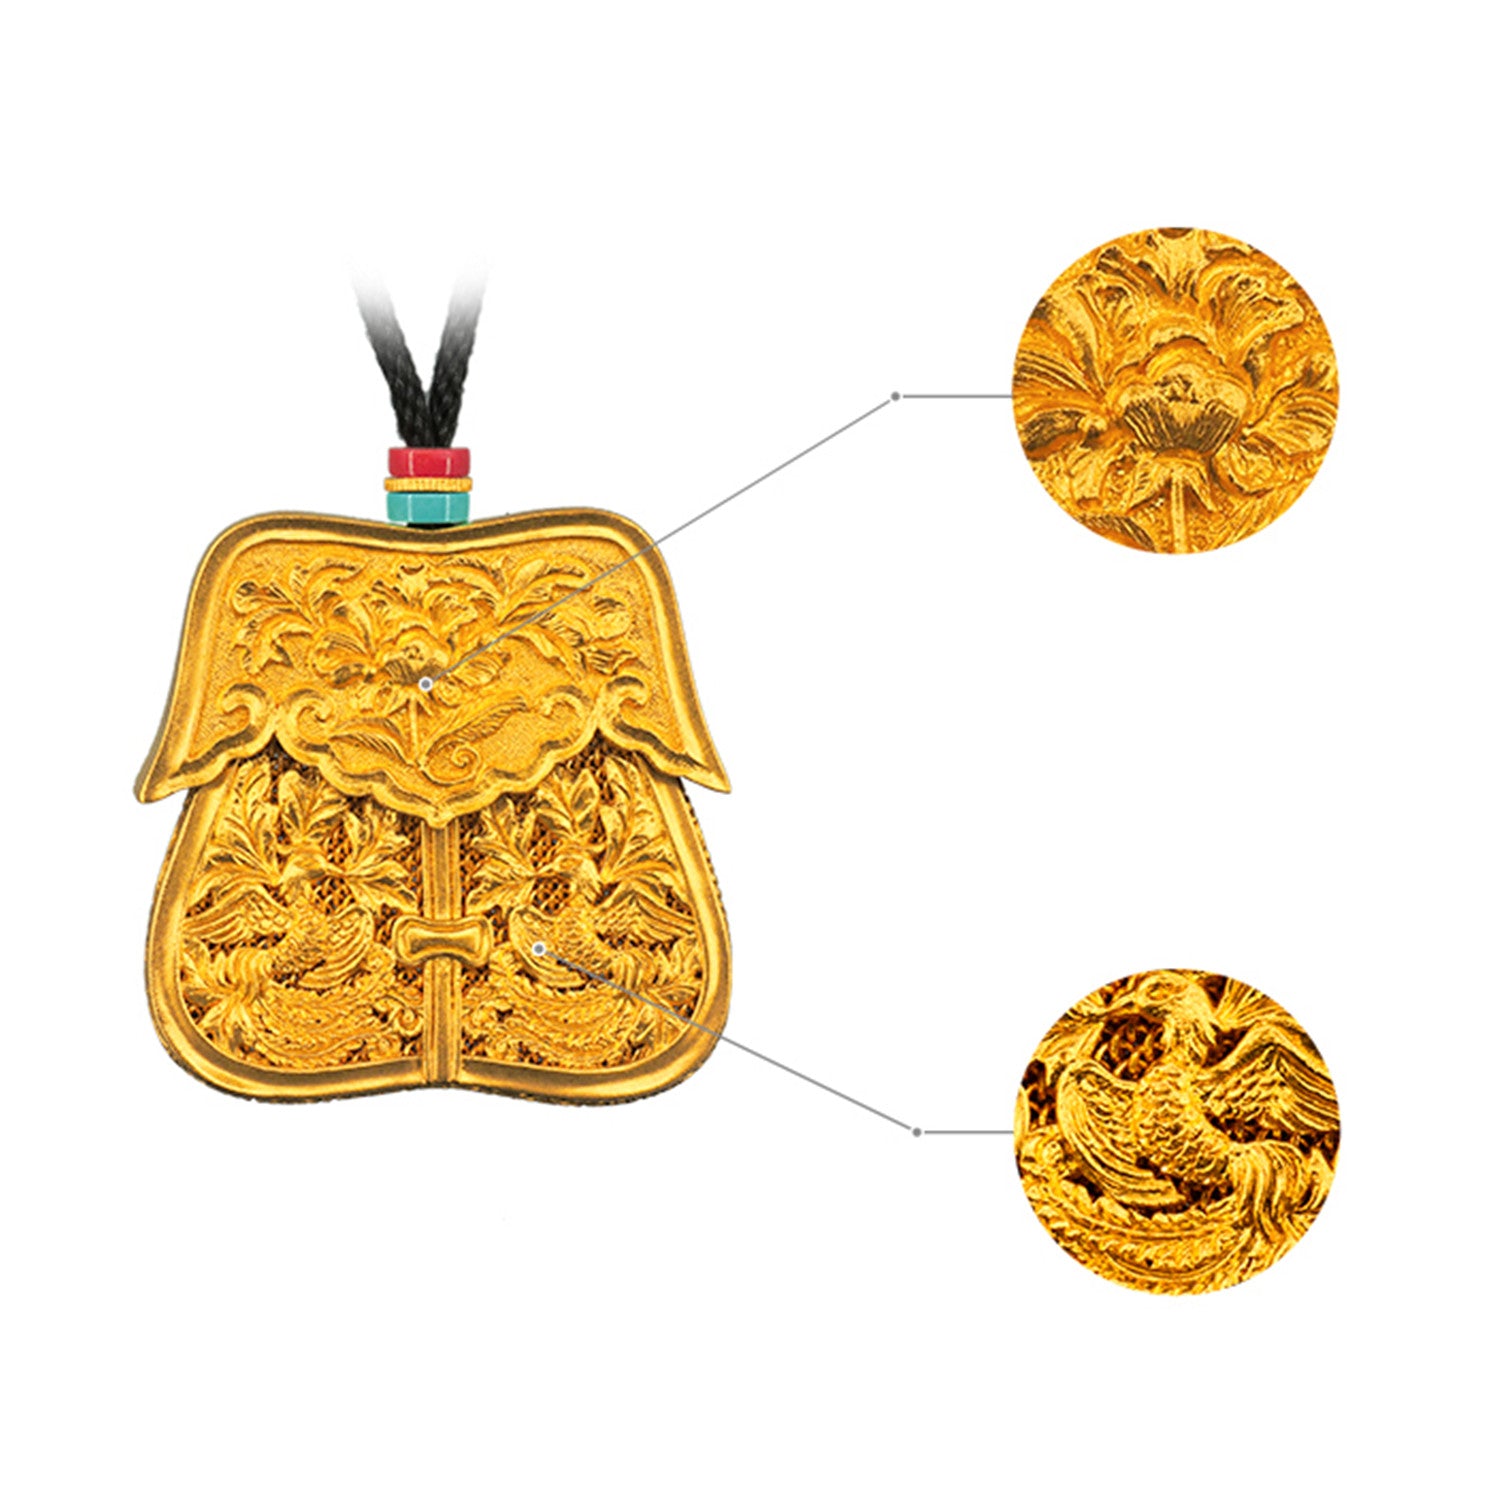 EVECOCO Full Gold Pendants,Peony Flower Pattern,Hand Forging,Fine Carving 55g